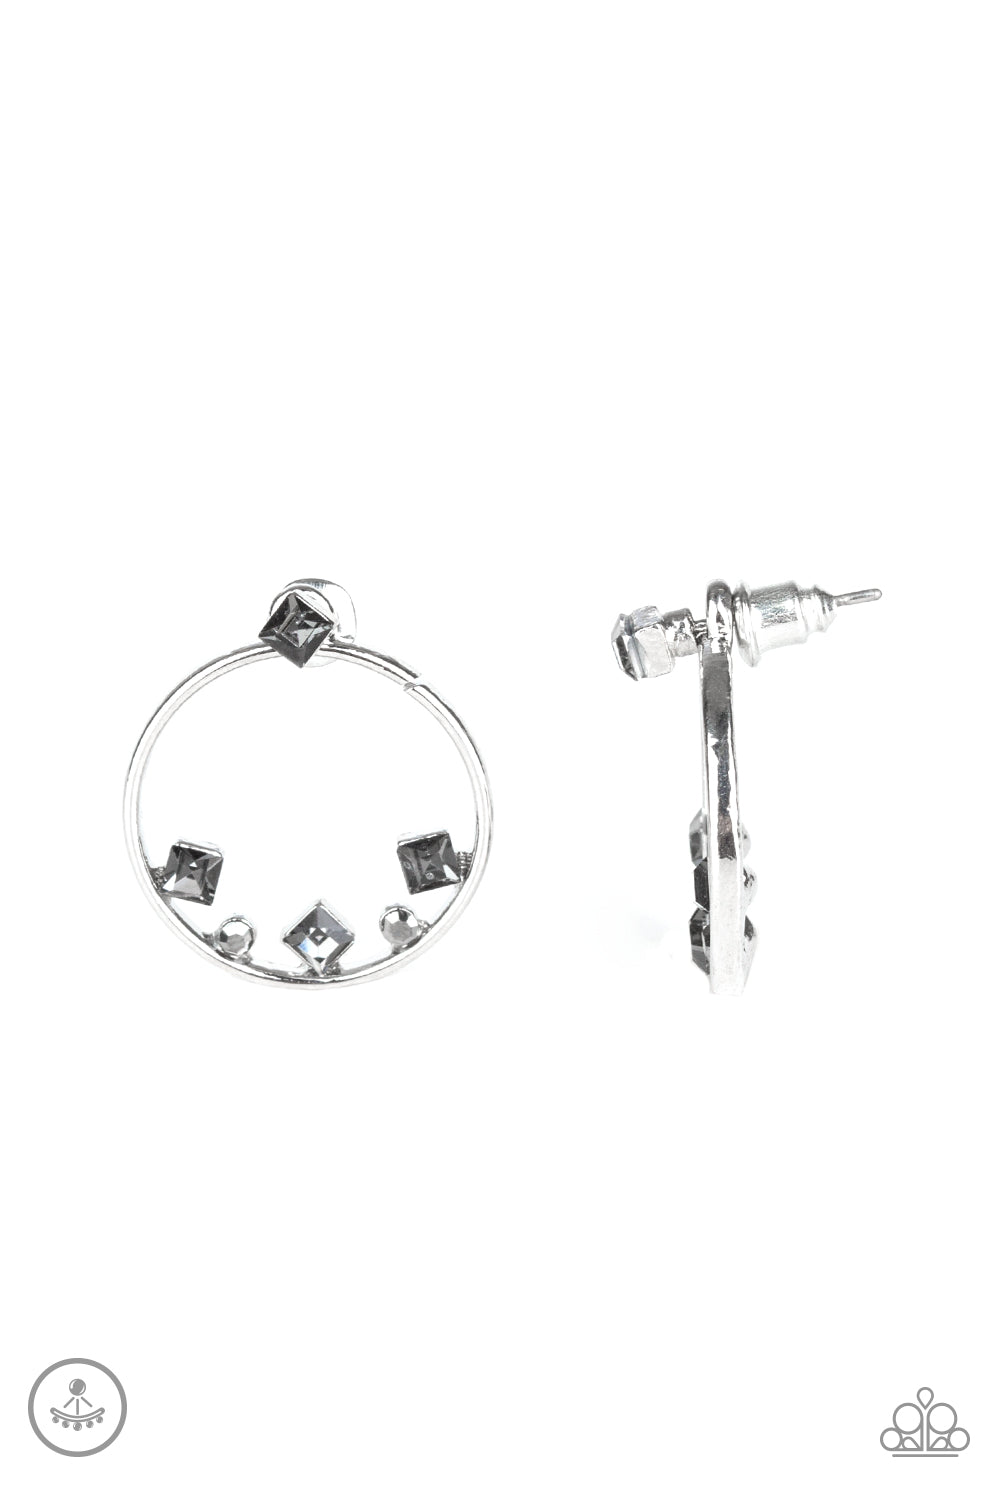 A solitaire smoky cube rhinestone attaches to a double-sided post, designed to fasten behind the ear. Encrusted with a bottom border of smoky cube and round hematite rhinestones, the circular double-sided post peeks out beneath the ear for a bold look. Earring attaches to a standard post fitting.